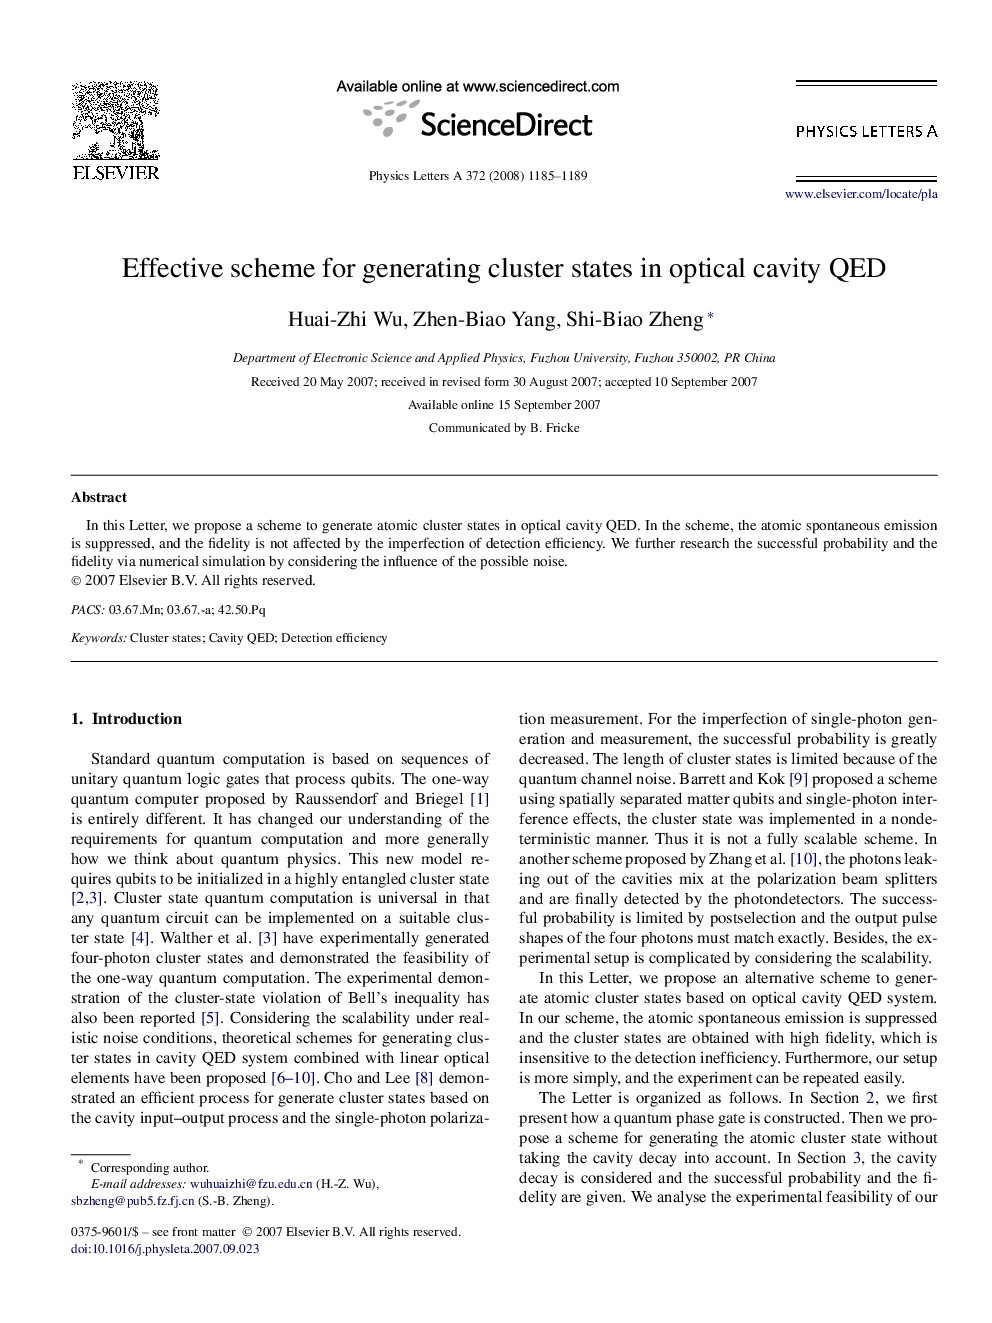 Effective scheme for generating cluster states in optical cavity QED